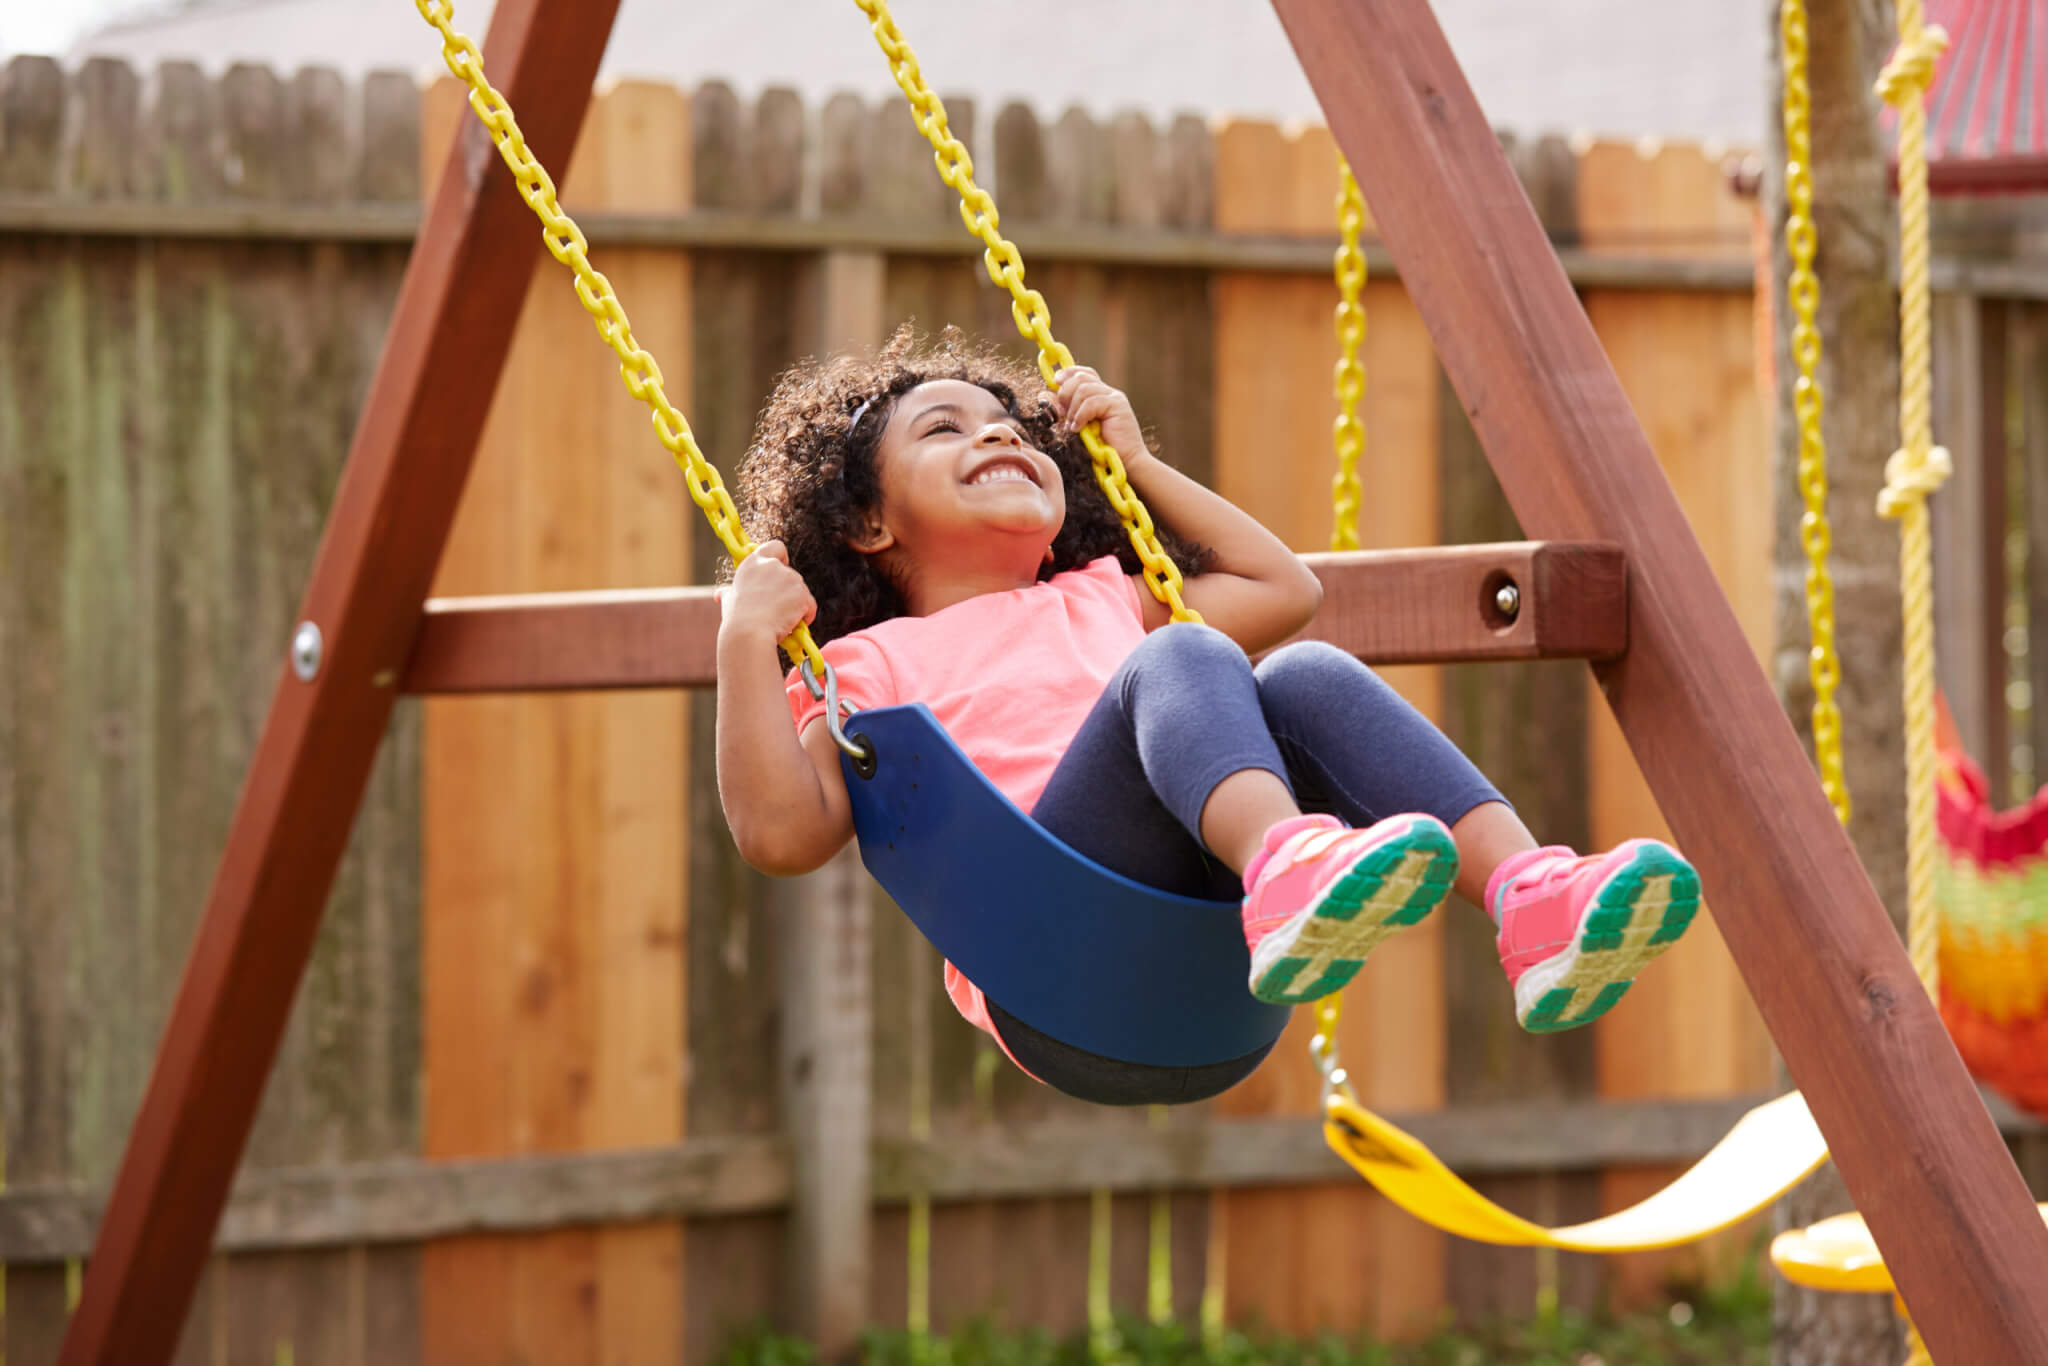 List of Playground Games for Kids on Swing Sets